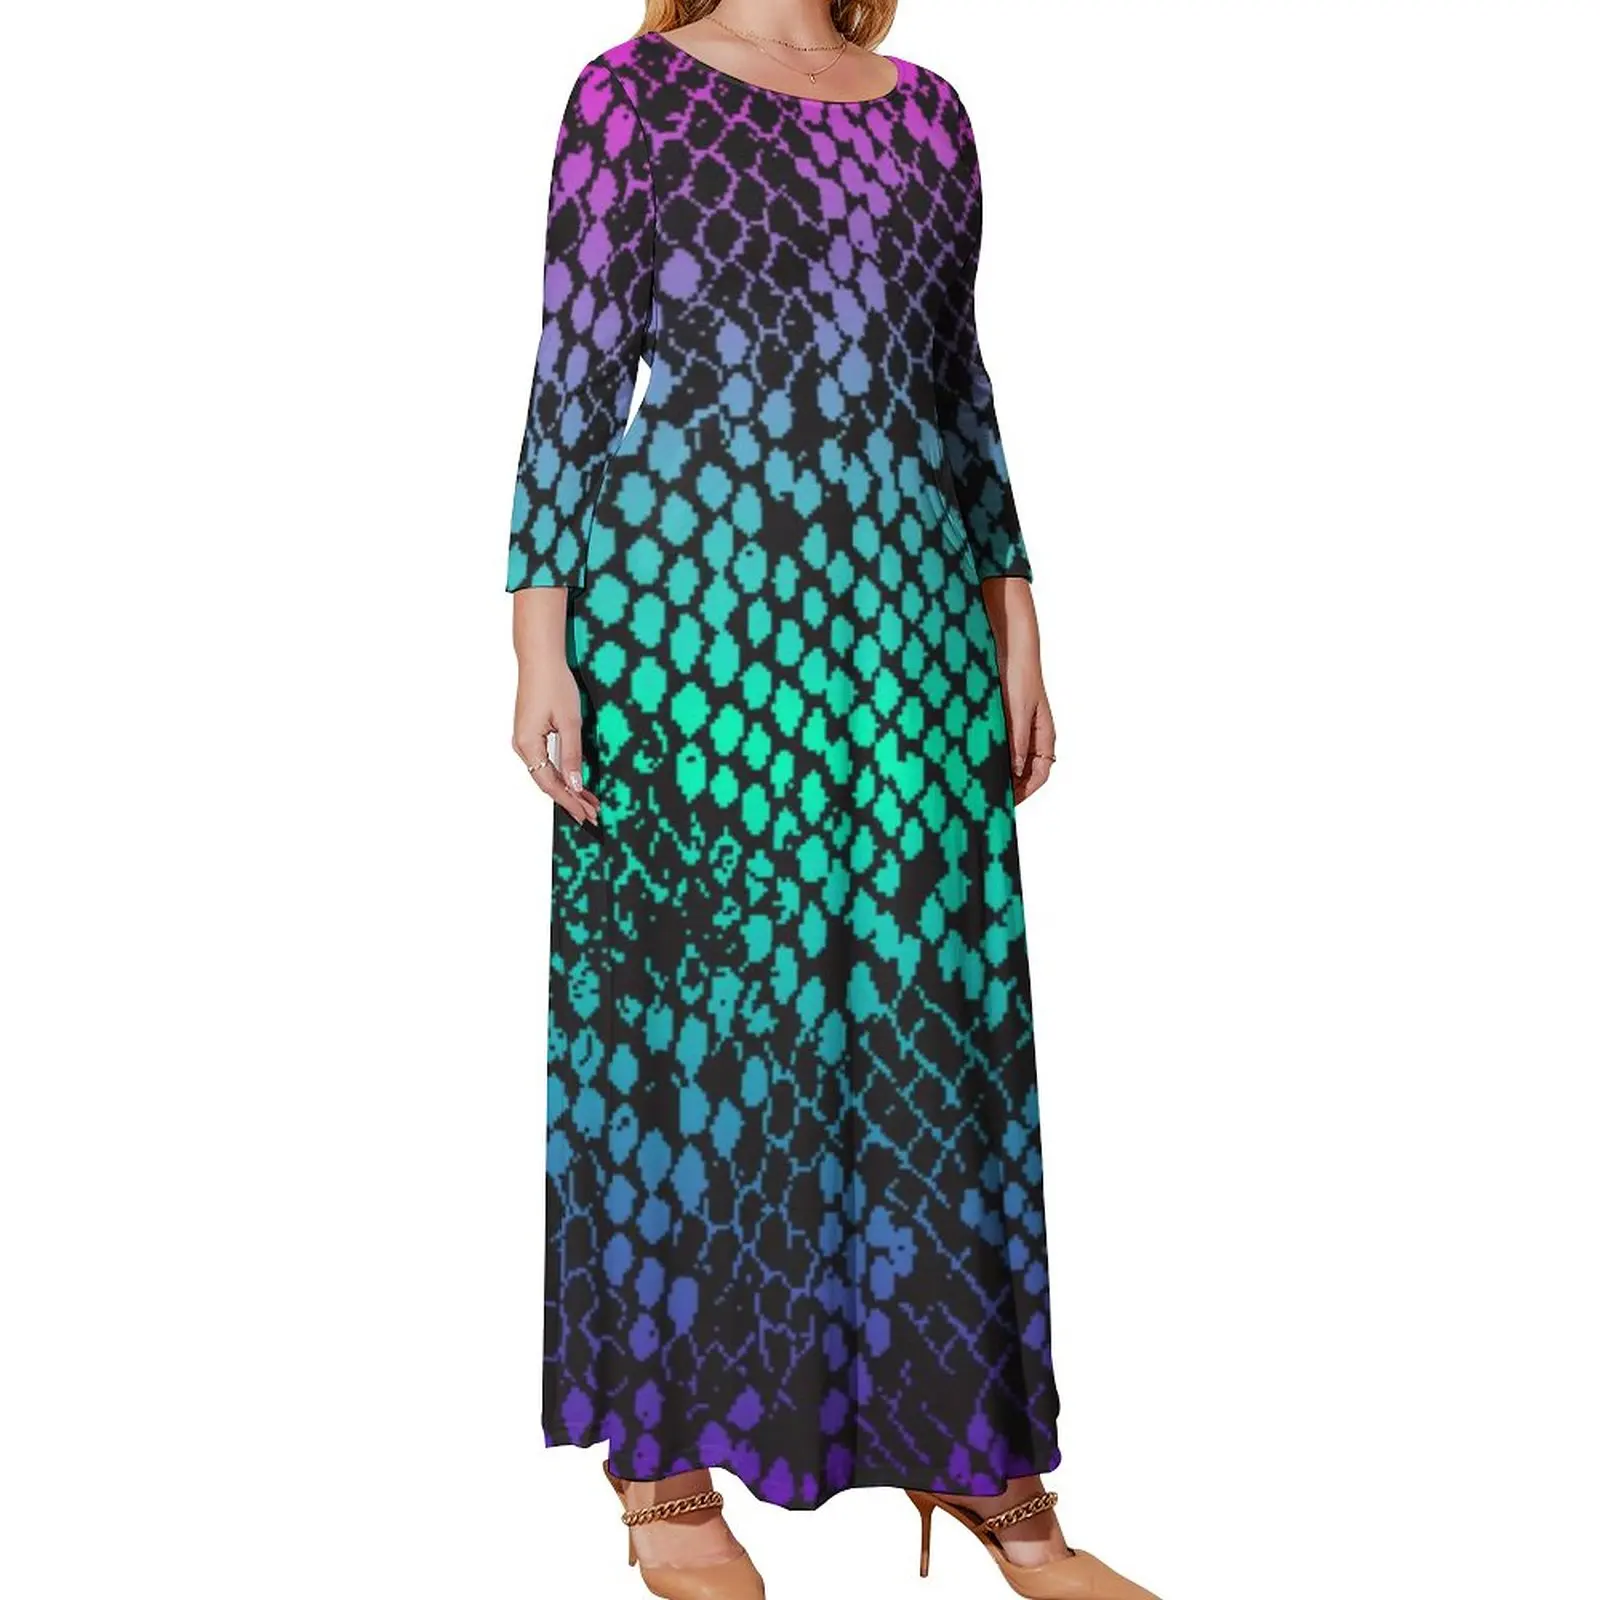 Multi-Color Fade Snakeskin Dress Plus Size Colorful Skin Print Sexy Maxi Dress Long Sleeve Street Style Beach Long Dresses Gift